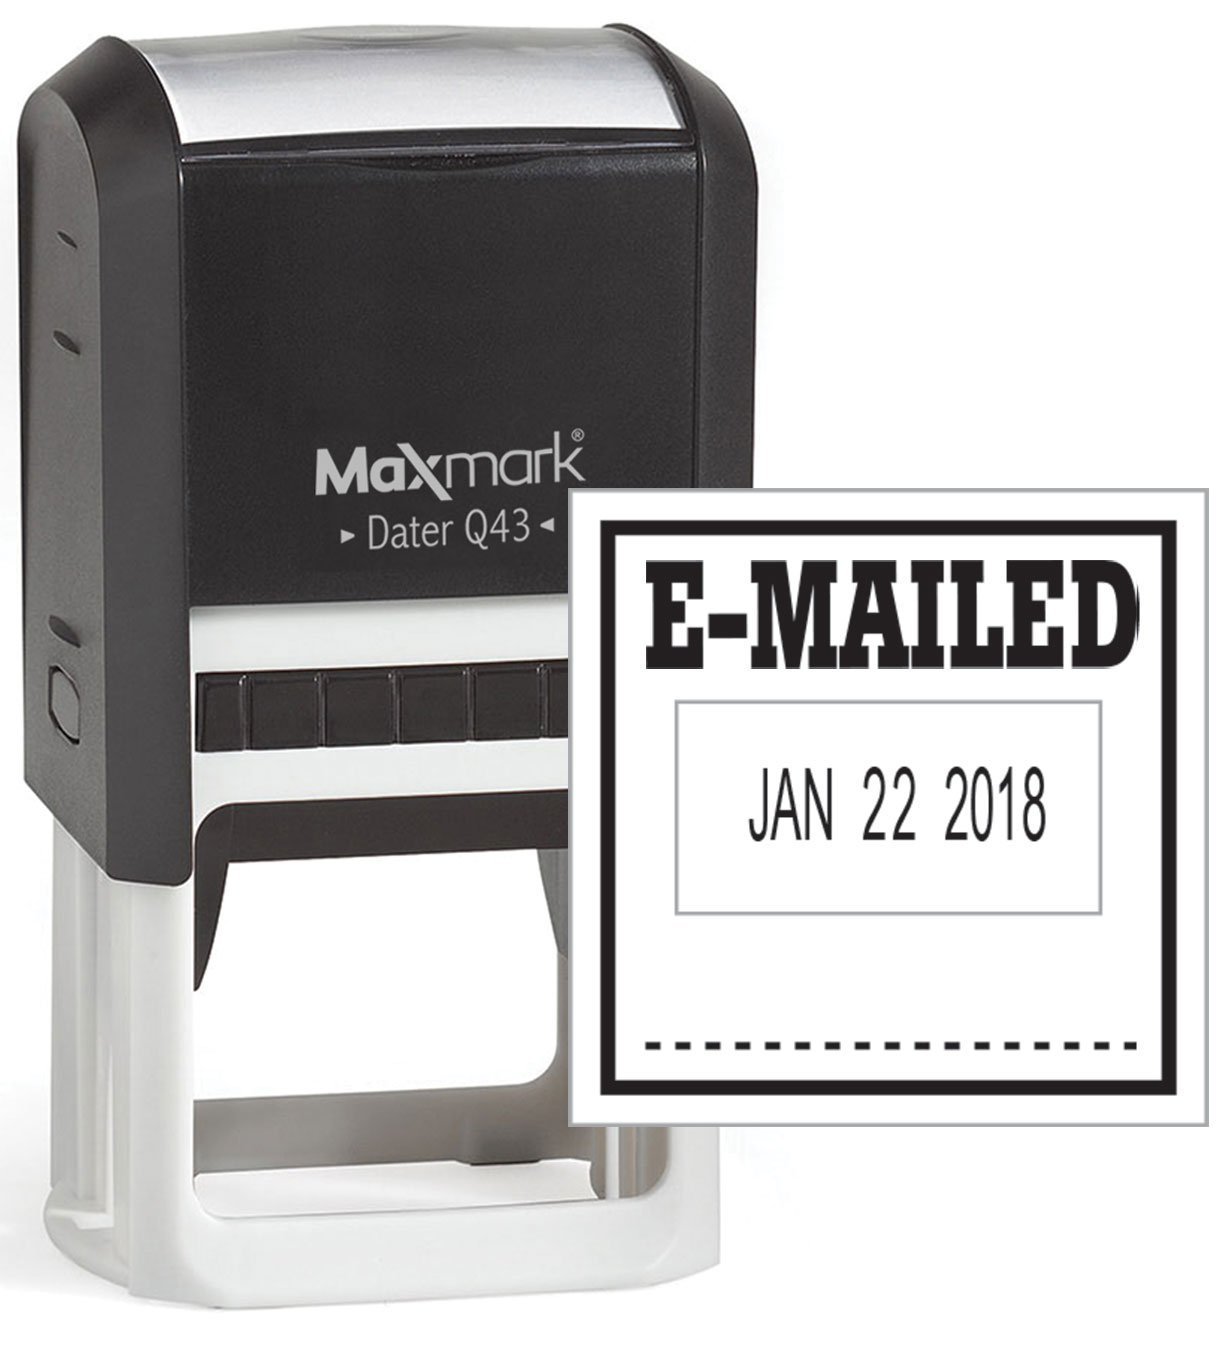 MaxMark Q43 (Large Size) Date Stamp with "E-MAILED" Self Inking Stamp - Black Ink